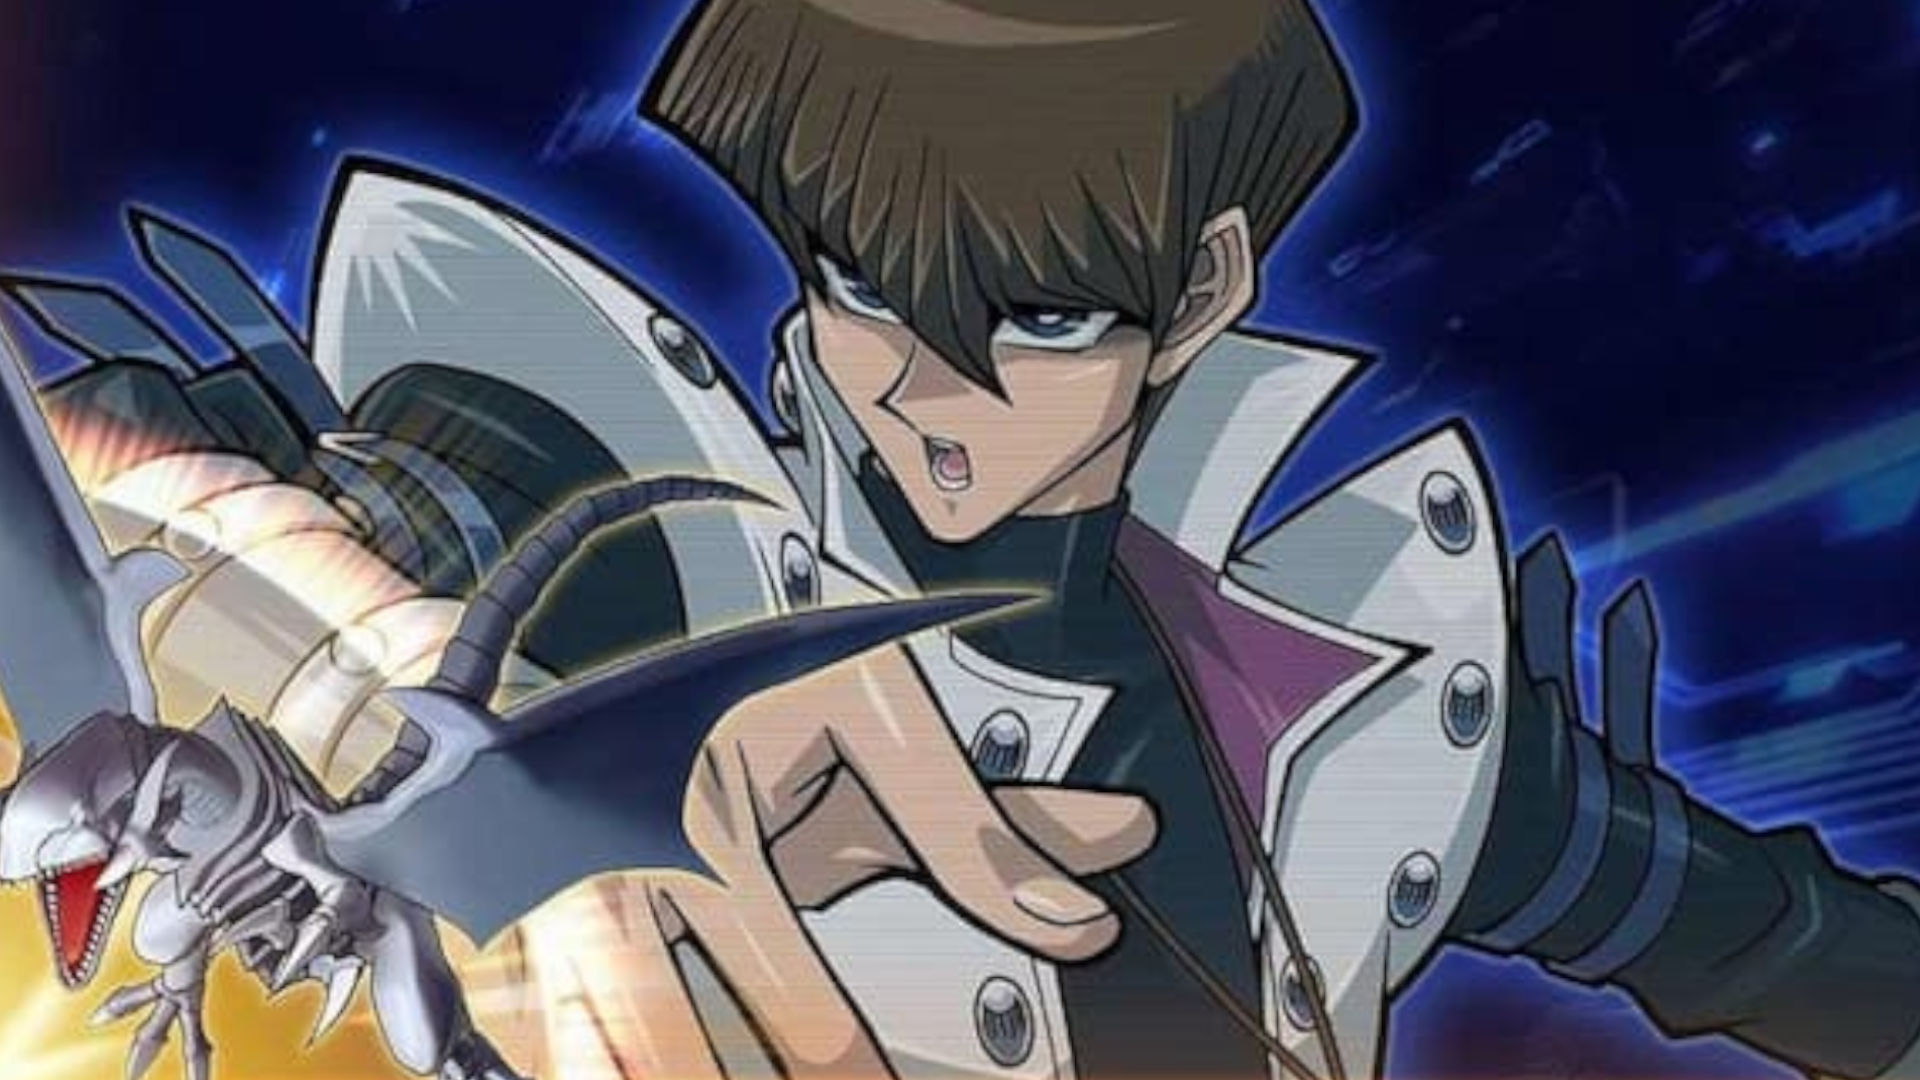 Yu-Gi-Oh! Cross Duel download – how to get it on android and iPhone | Pocket Tactics